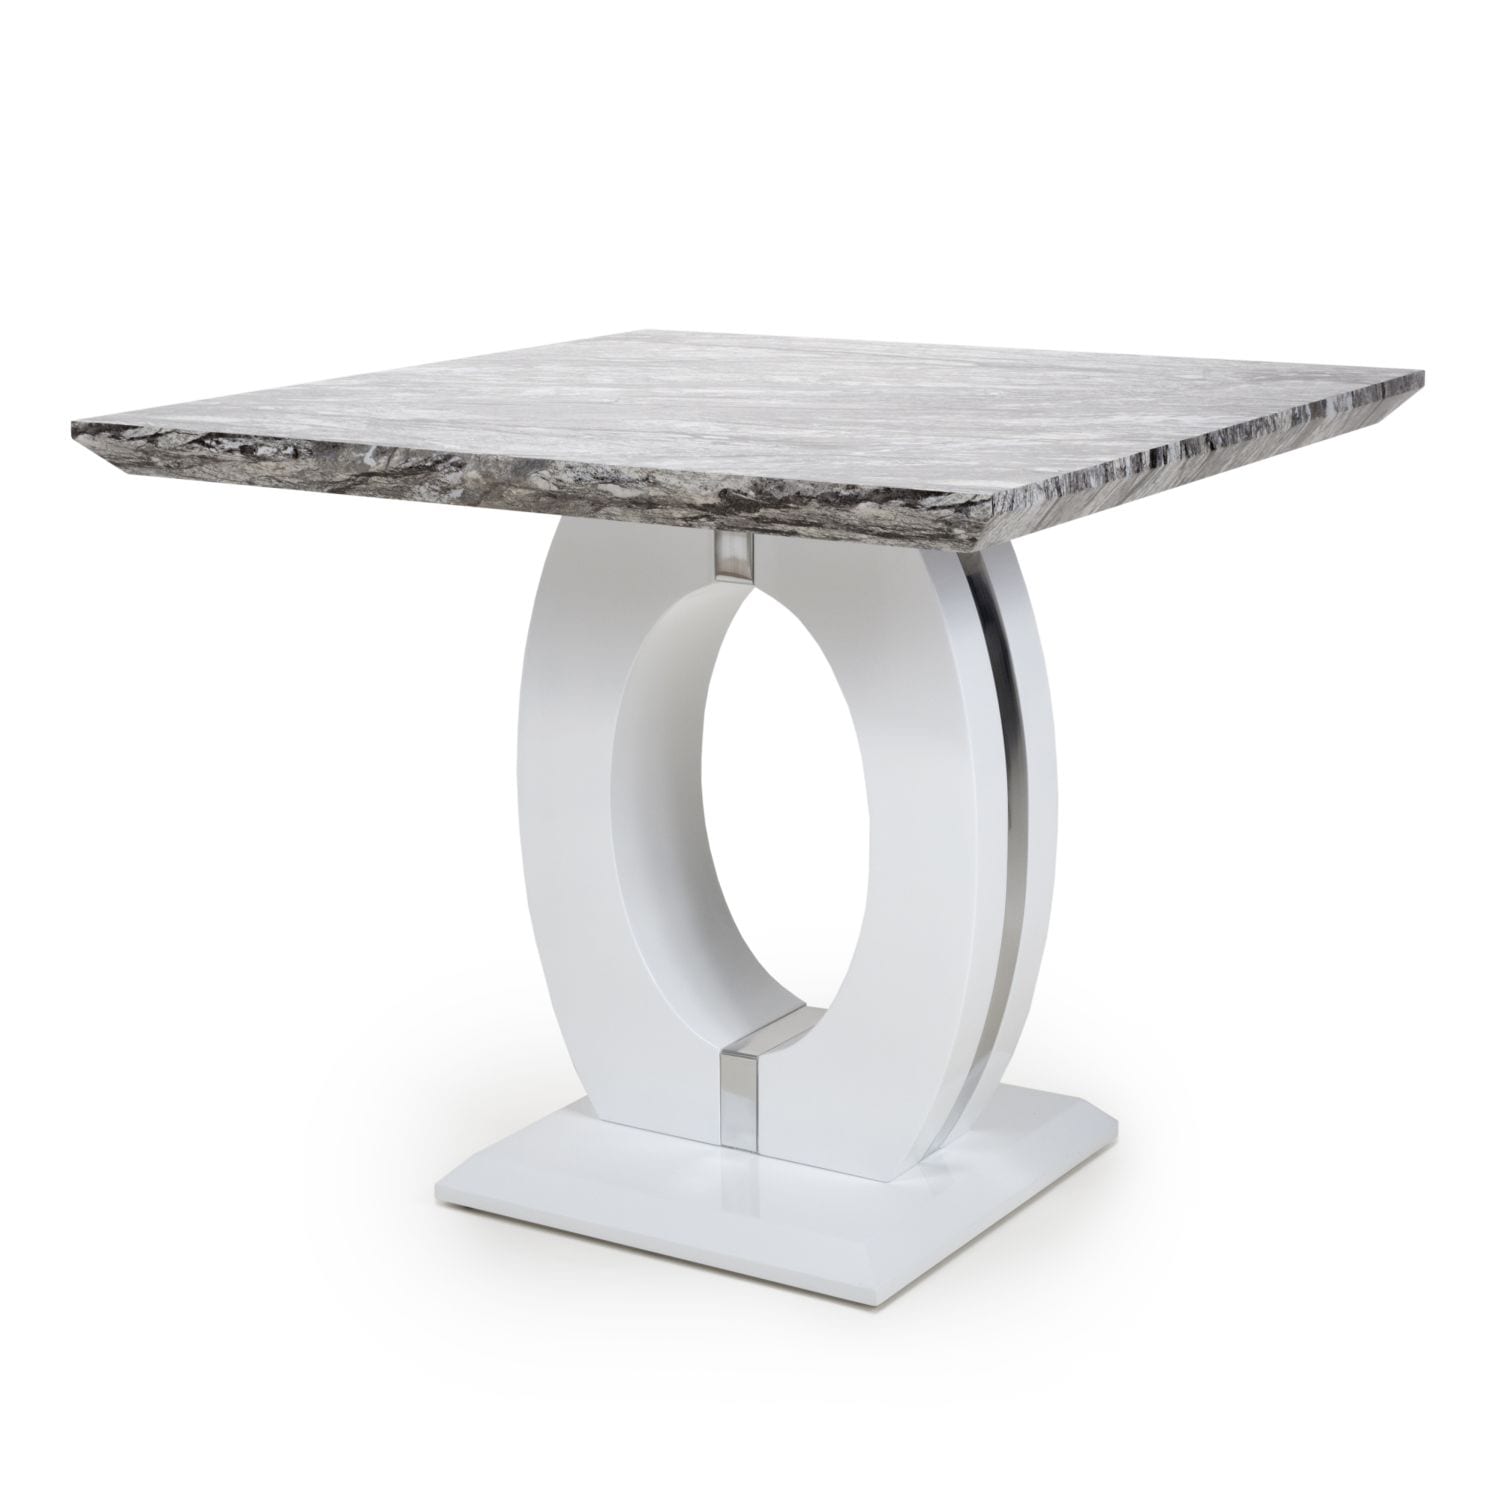 Poseidon Square Marble Effect Top Table